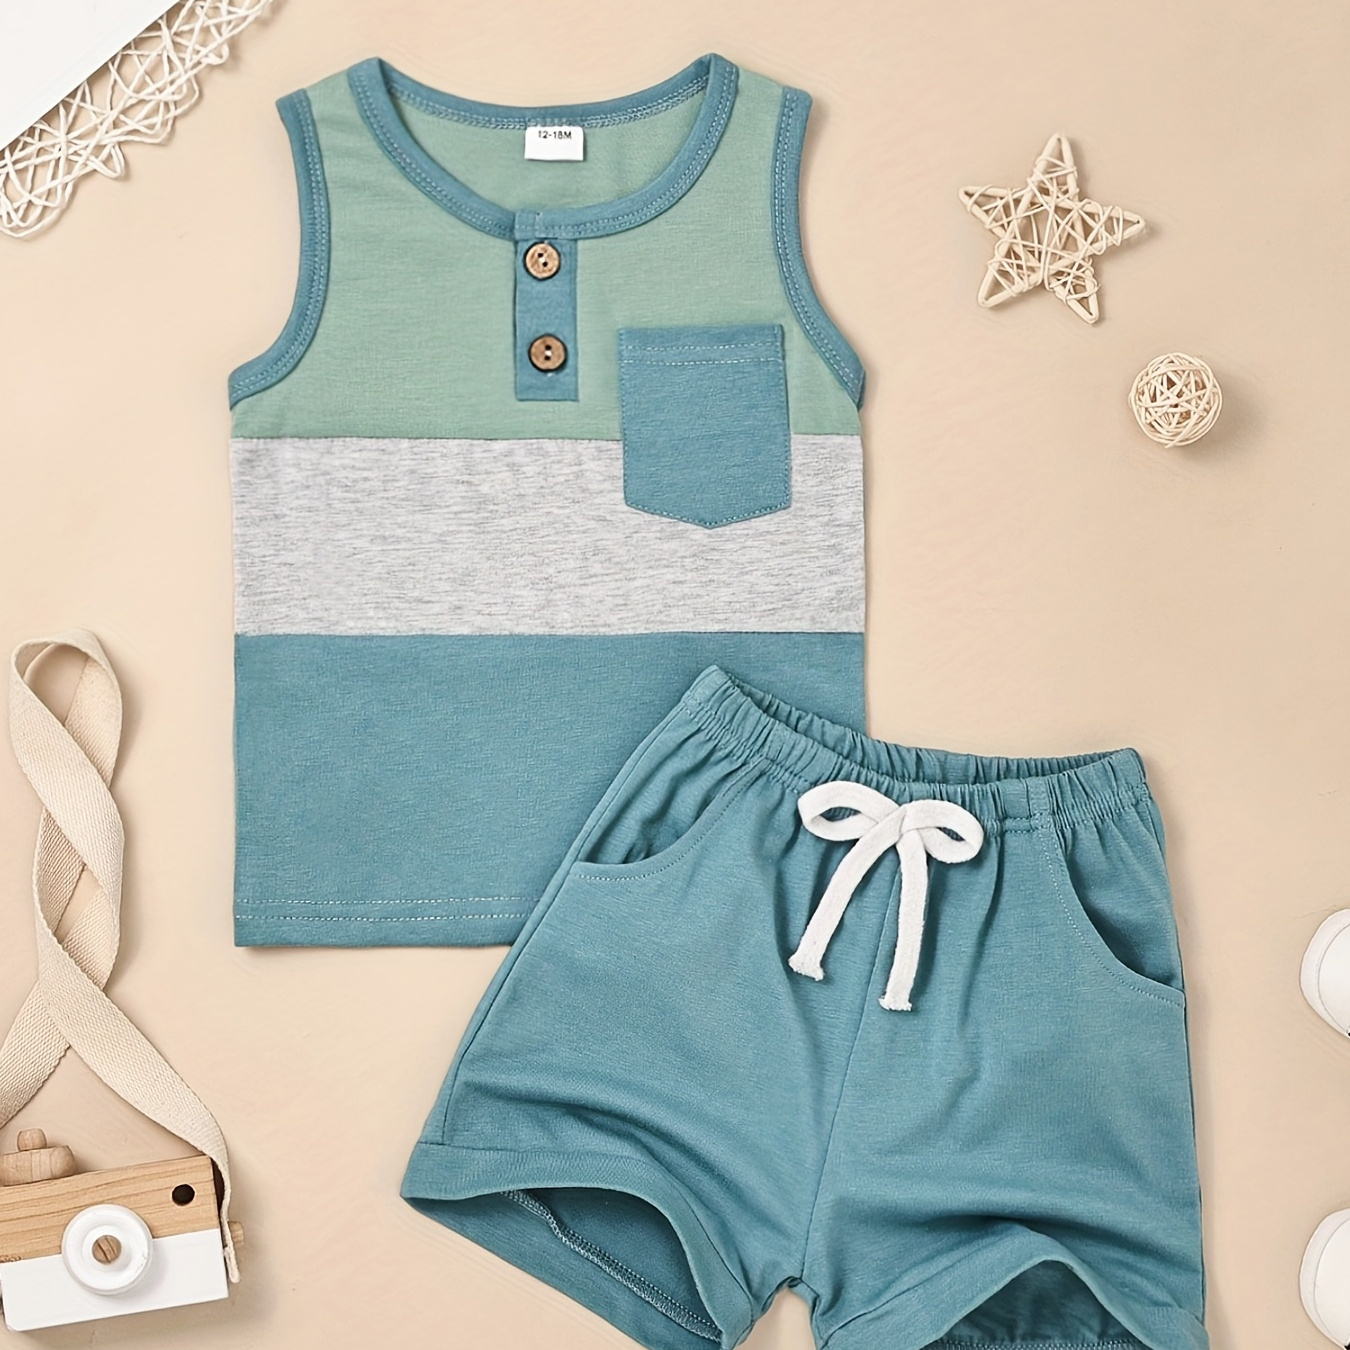 

Toddler Baby Boy Clothes Boys Summer Outfits Sleeveless T-shirt Shorts Set 6 Months-4t